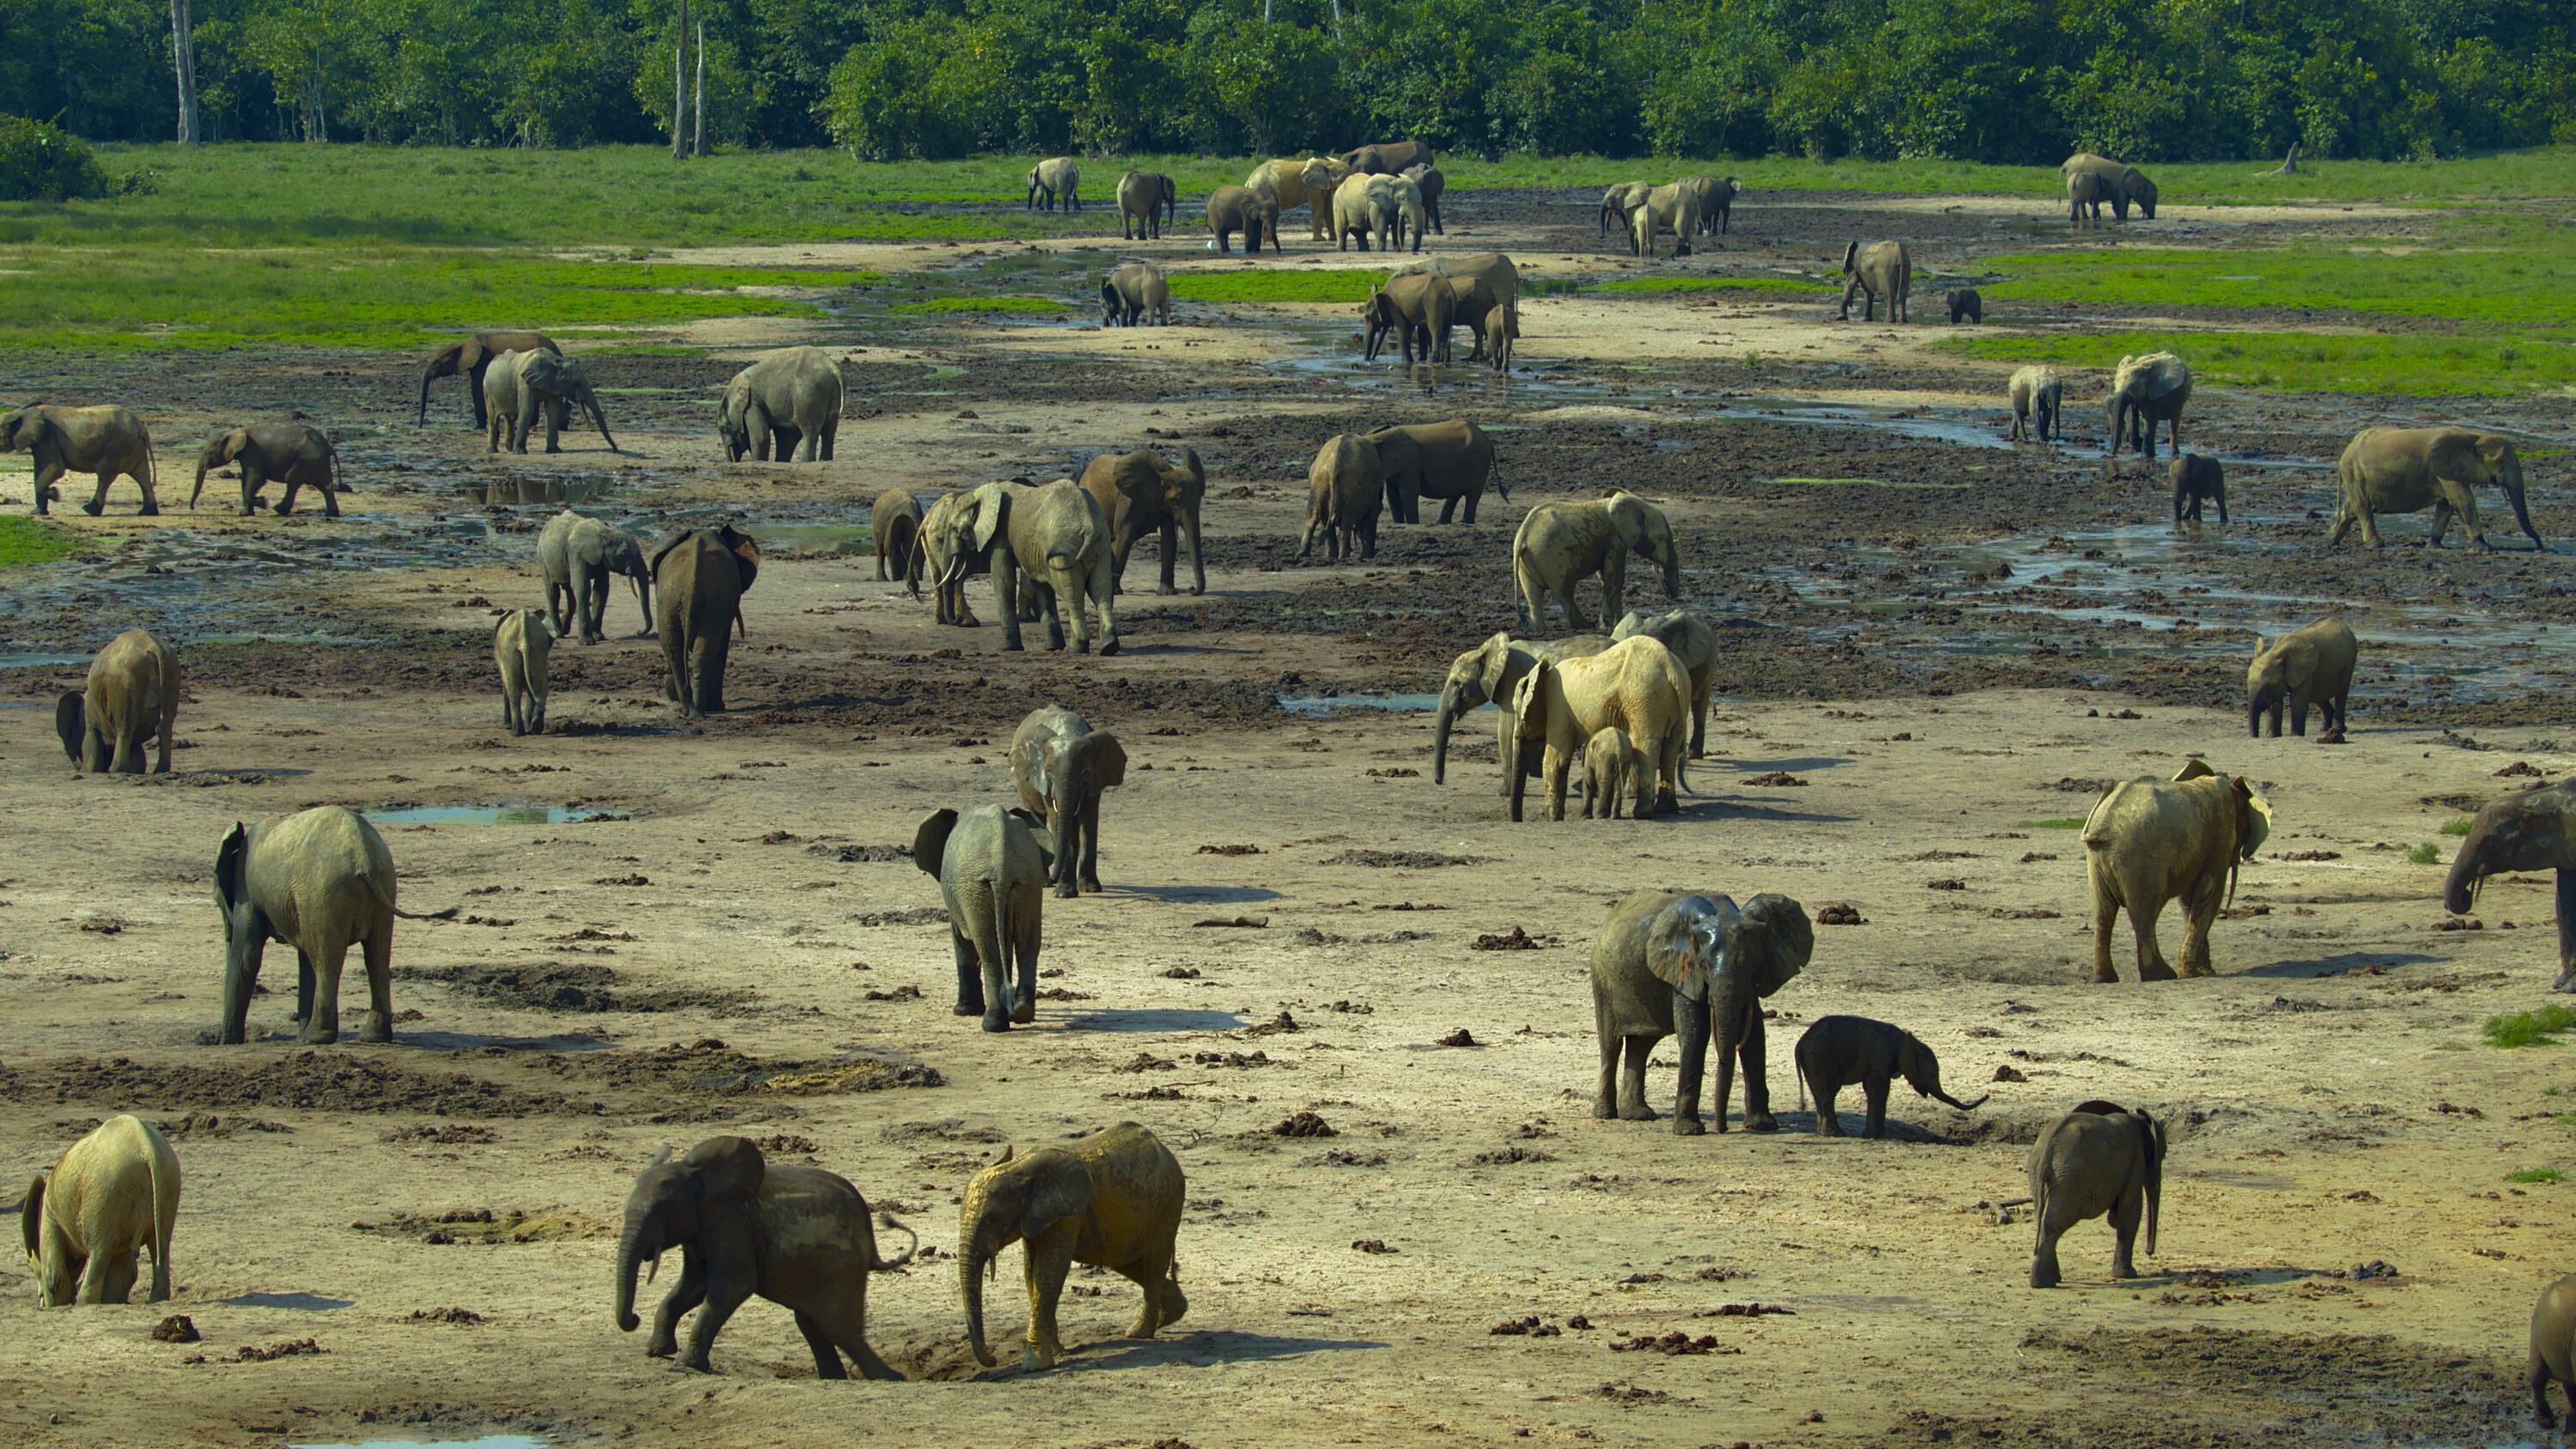 Elephants on the Bai. (National Geographic for Disney+/Bertie Gregory)